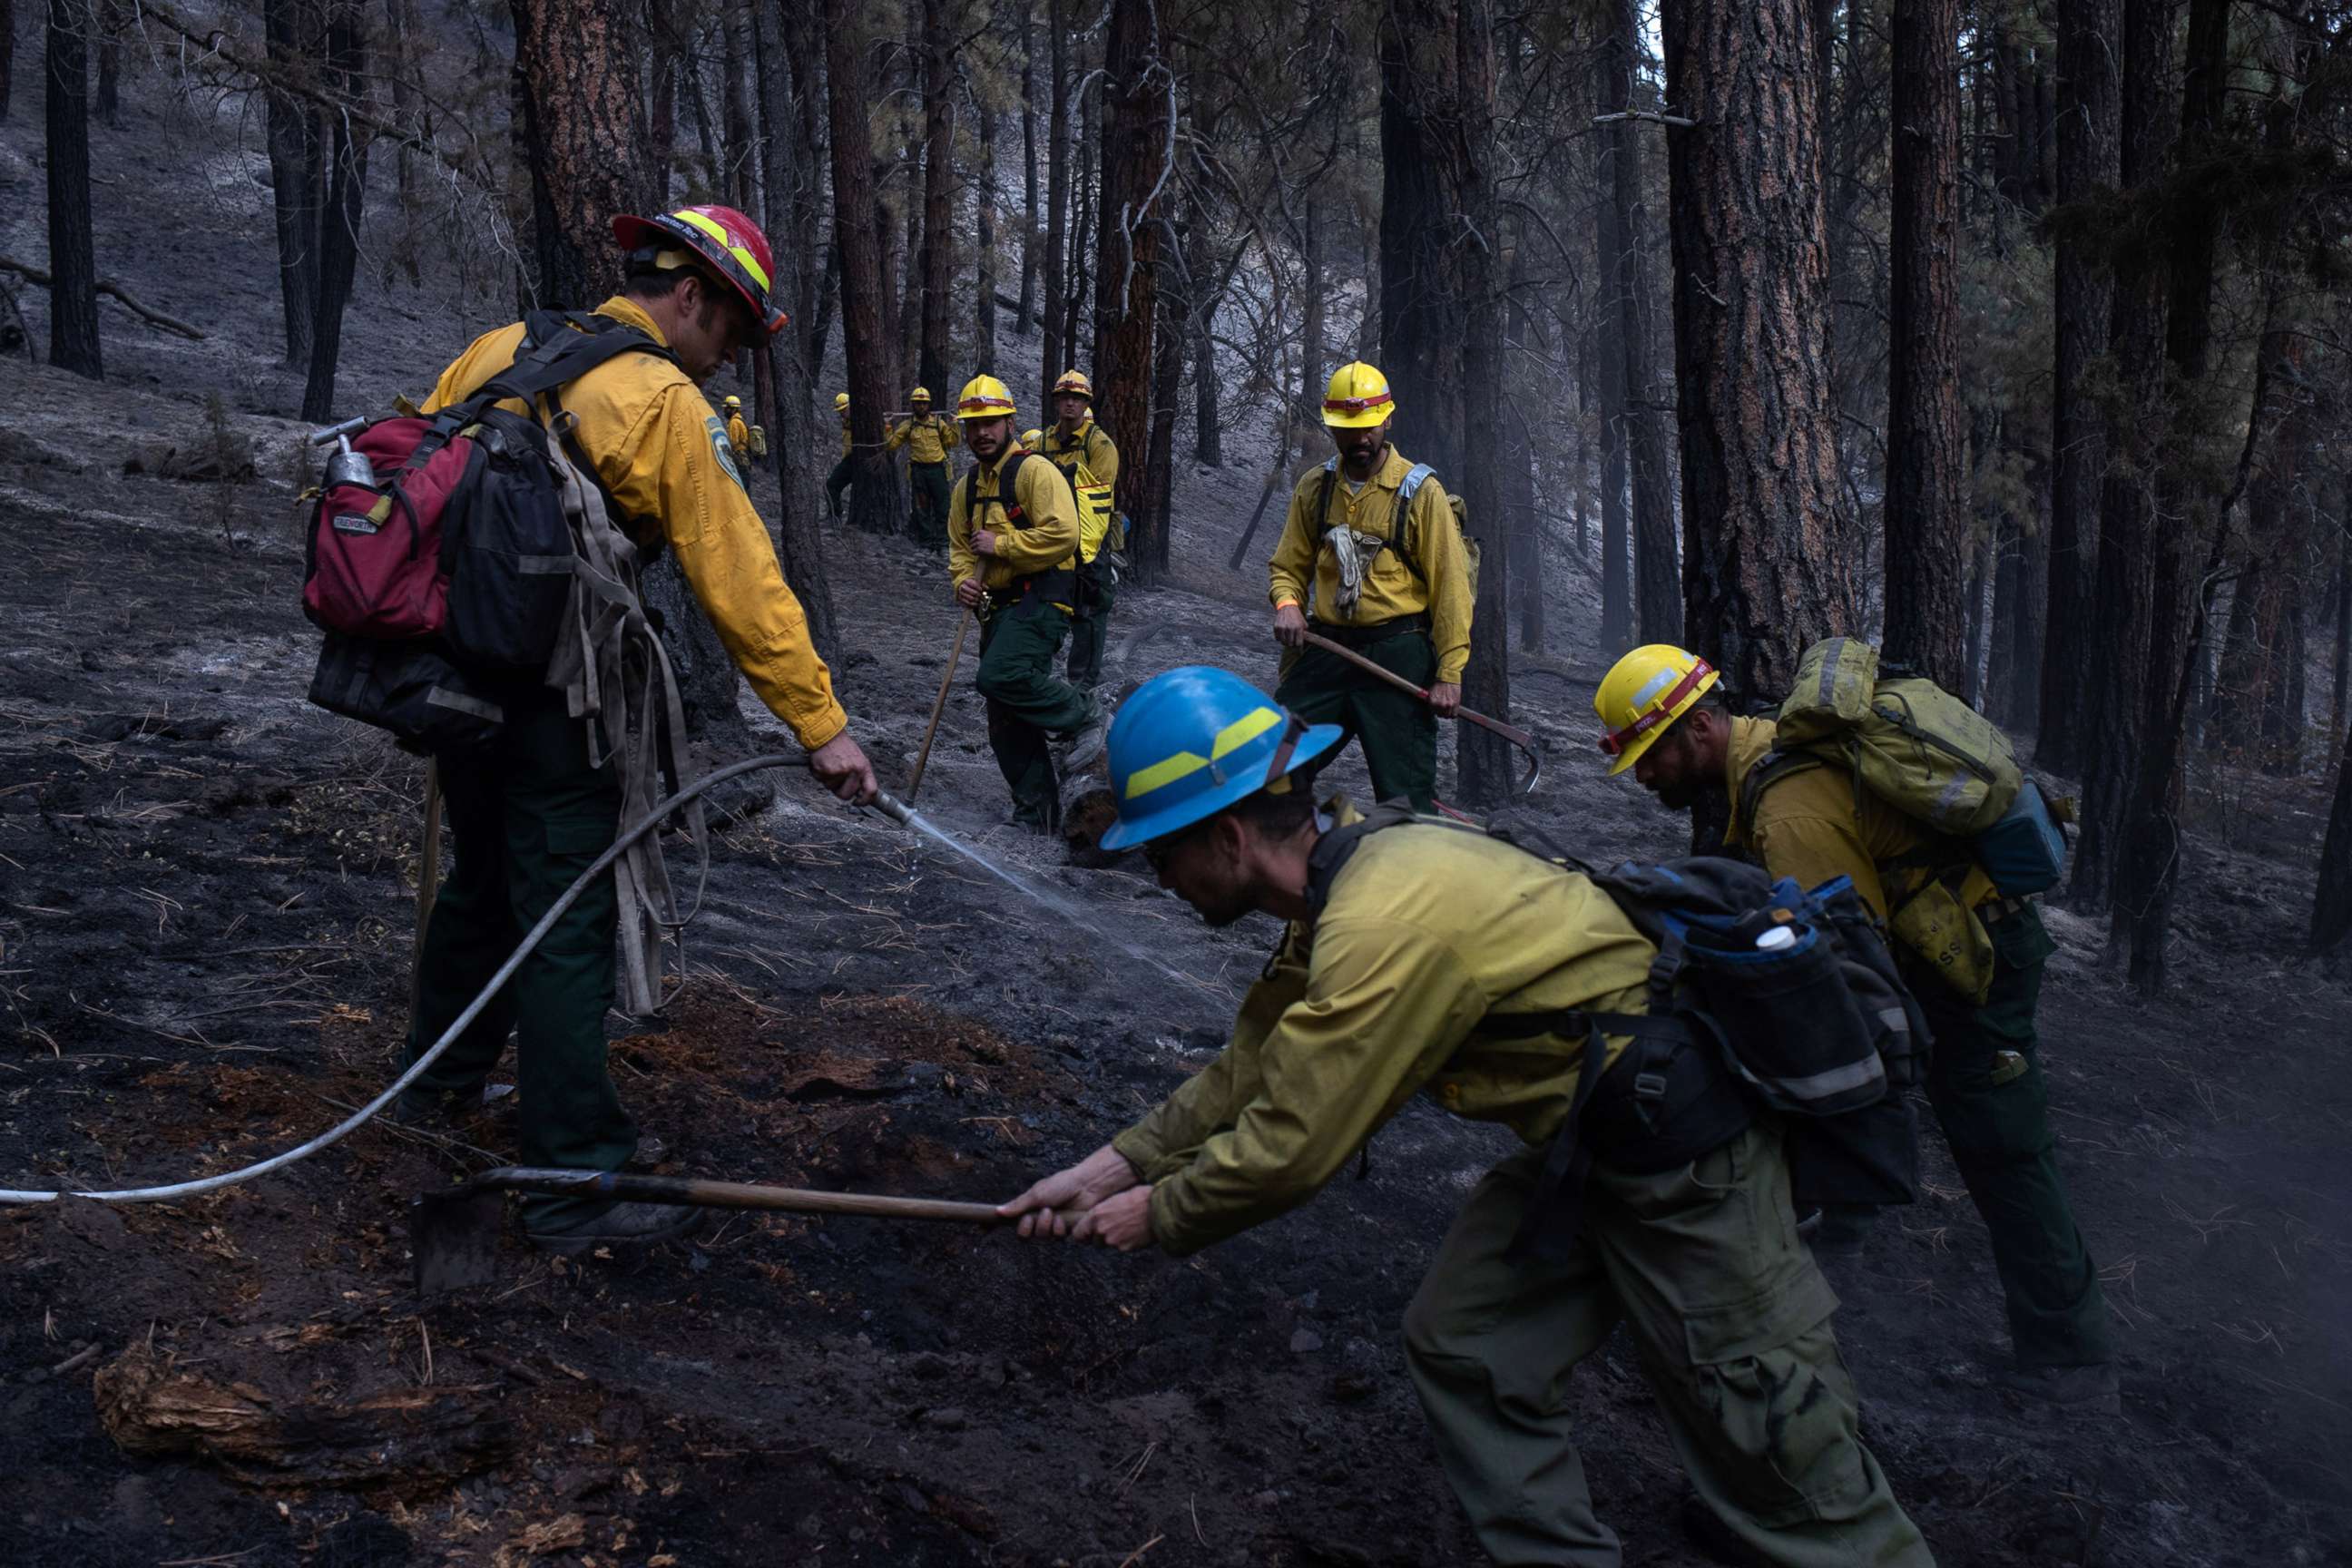 Inmates working as firefighters are led by Ryan Webb, Oregon Department of Forestry and David Halbleib, the fire crew supervisor and correctional officer, as the crew tries to mop up hotspots from the Brattain Fire, near Paisley, Ore., Sept. 19, 2020.